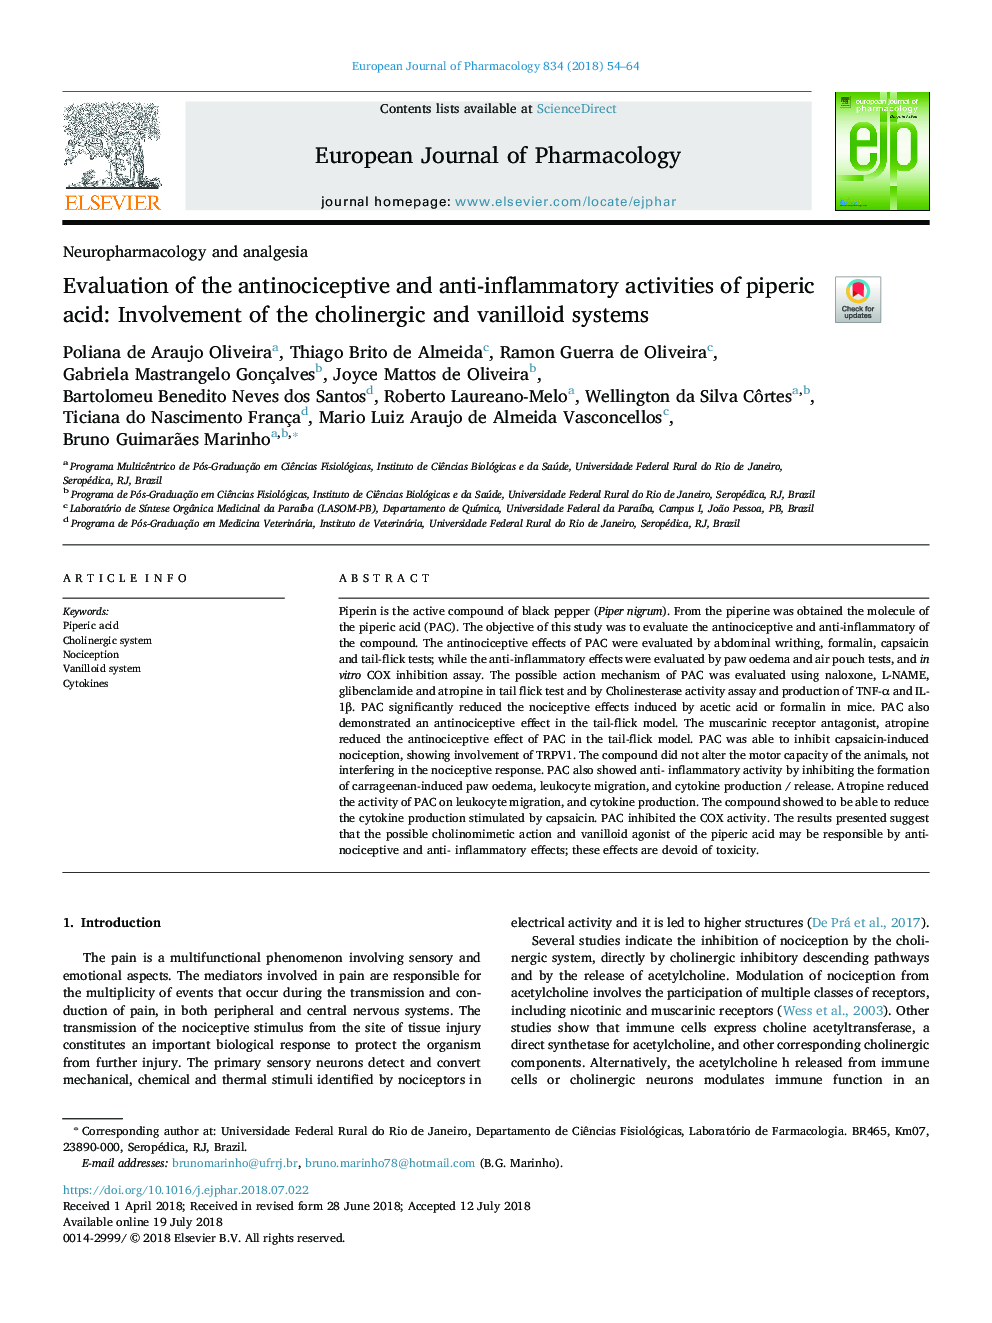 Evaluation of the antinociceptive and anti-inflammatory activities of piperic acid: Involvement of the cholinergic and vanilloid systems